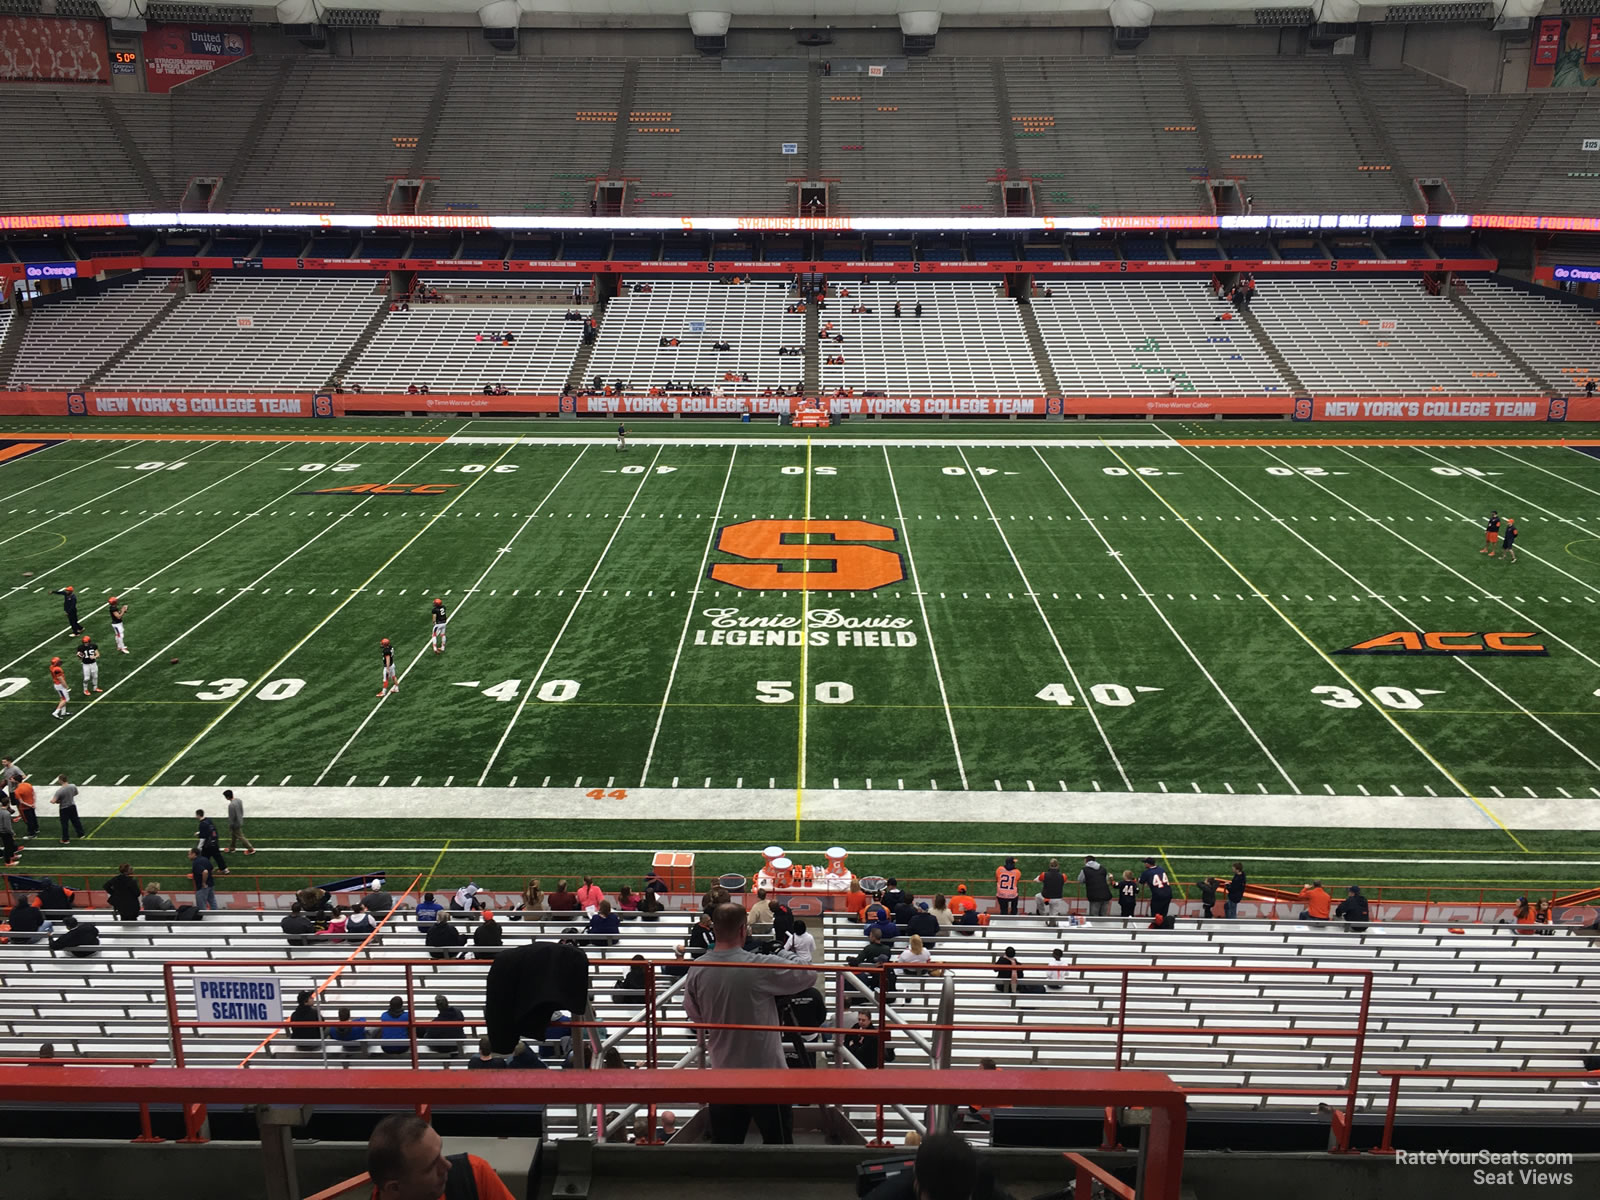 section 301, row p seat view  for football - carrier dome